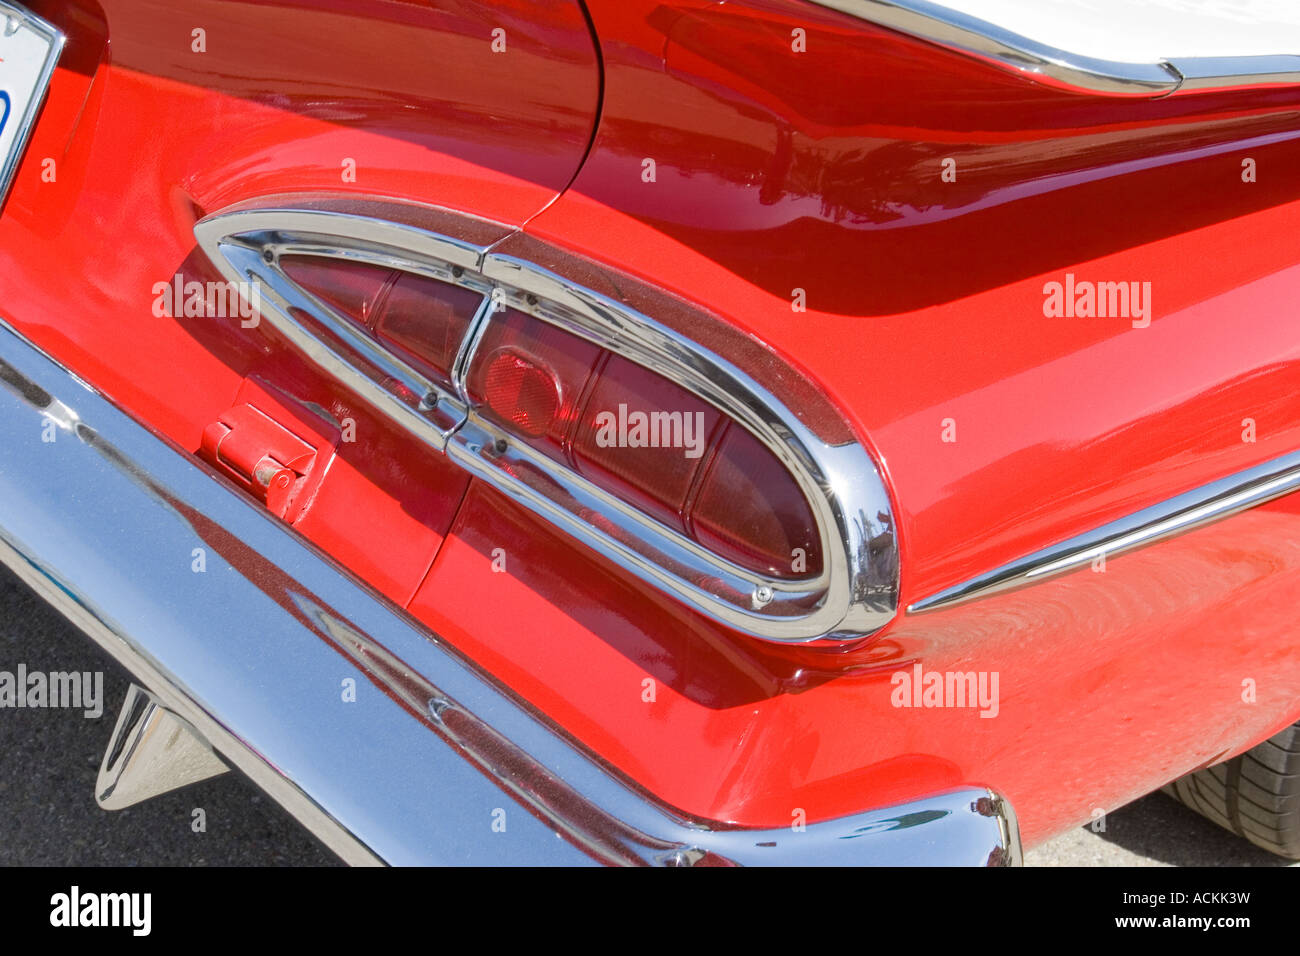 Fins and tail light at the back of a red and white Chevrolet El Camino  classic car at an auto show Stock Photo - Alamy